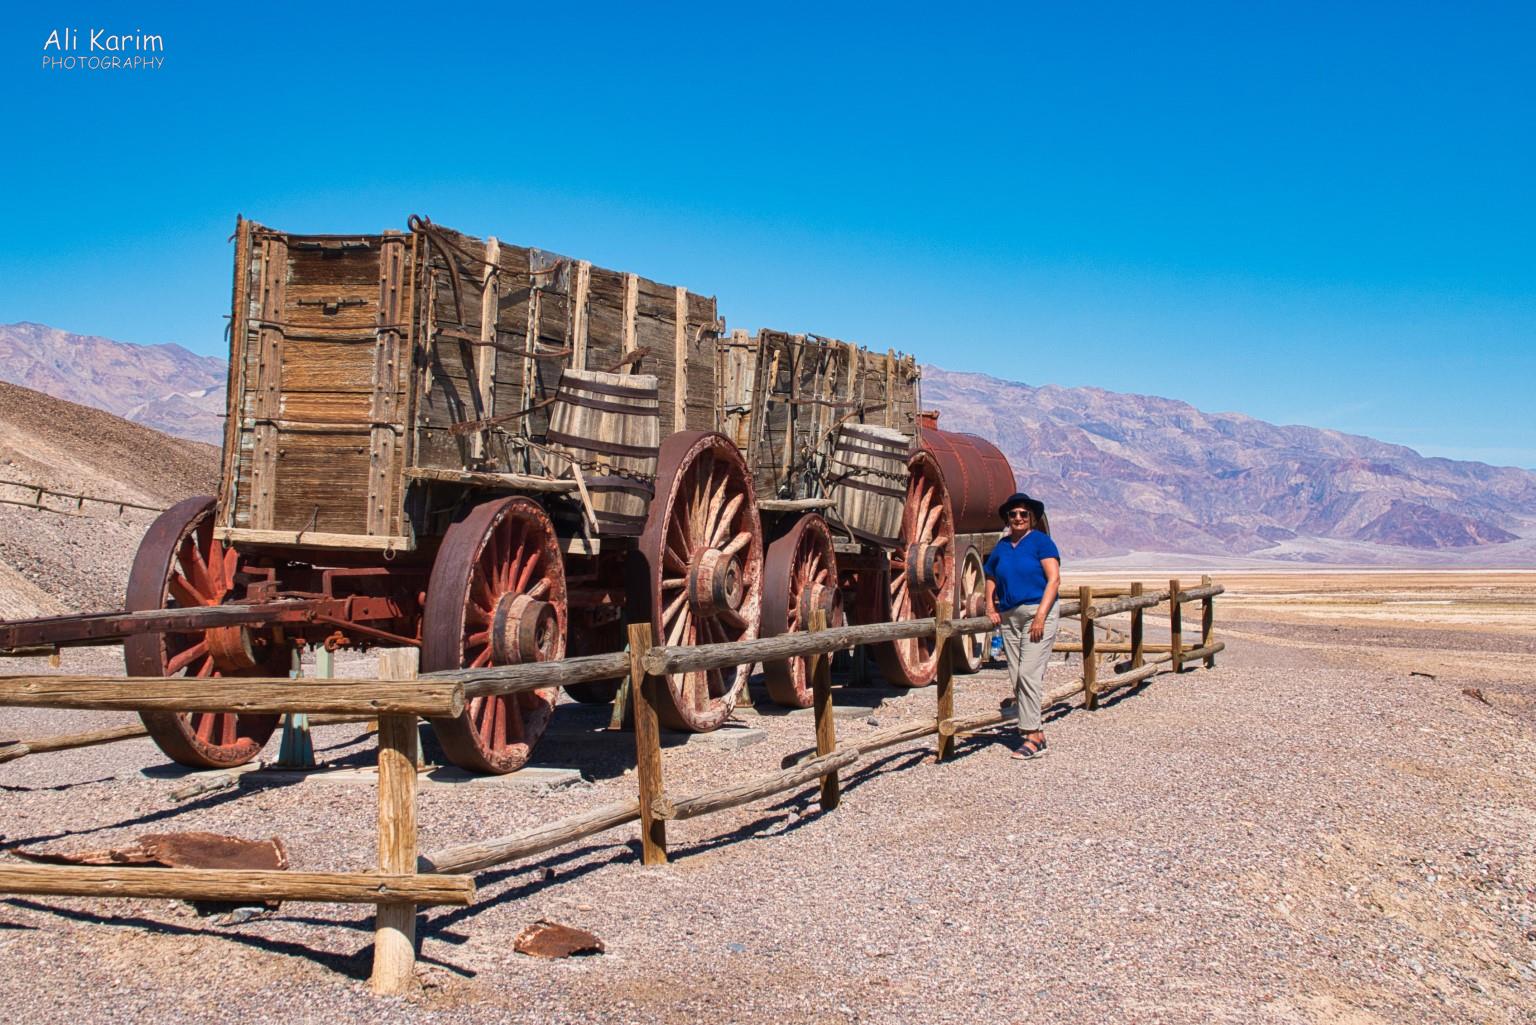 Death Valley National Park, June 2020, Checking out original 20 Mule Team Borax wagons used to transport Borax and drinking water